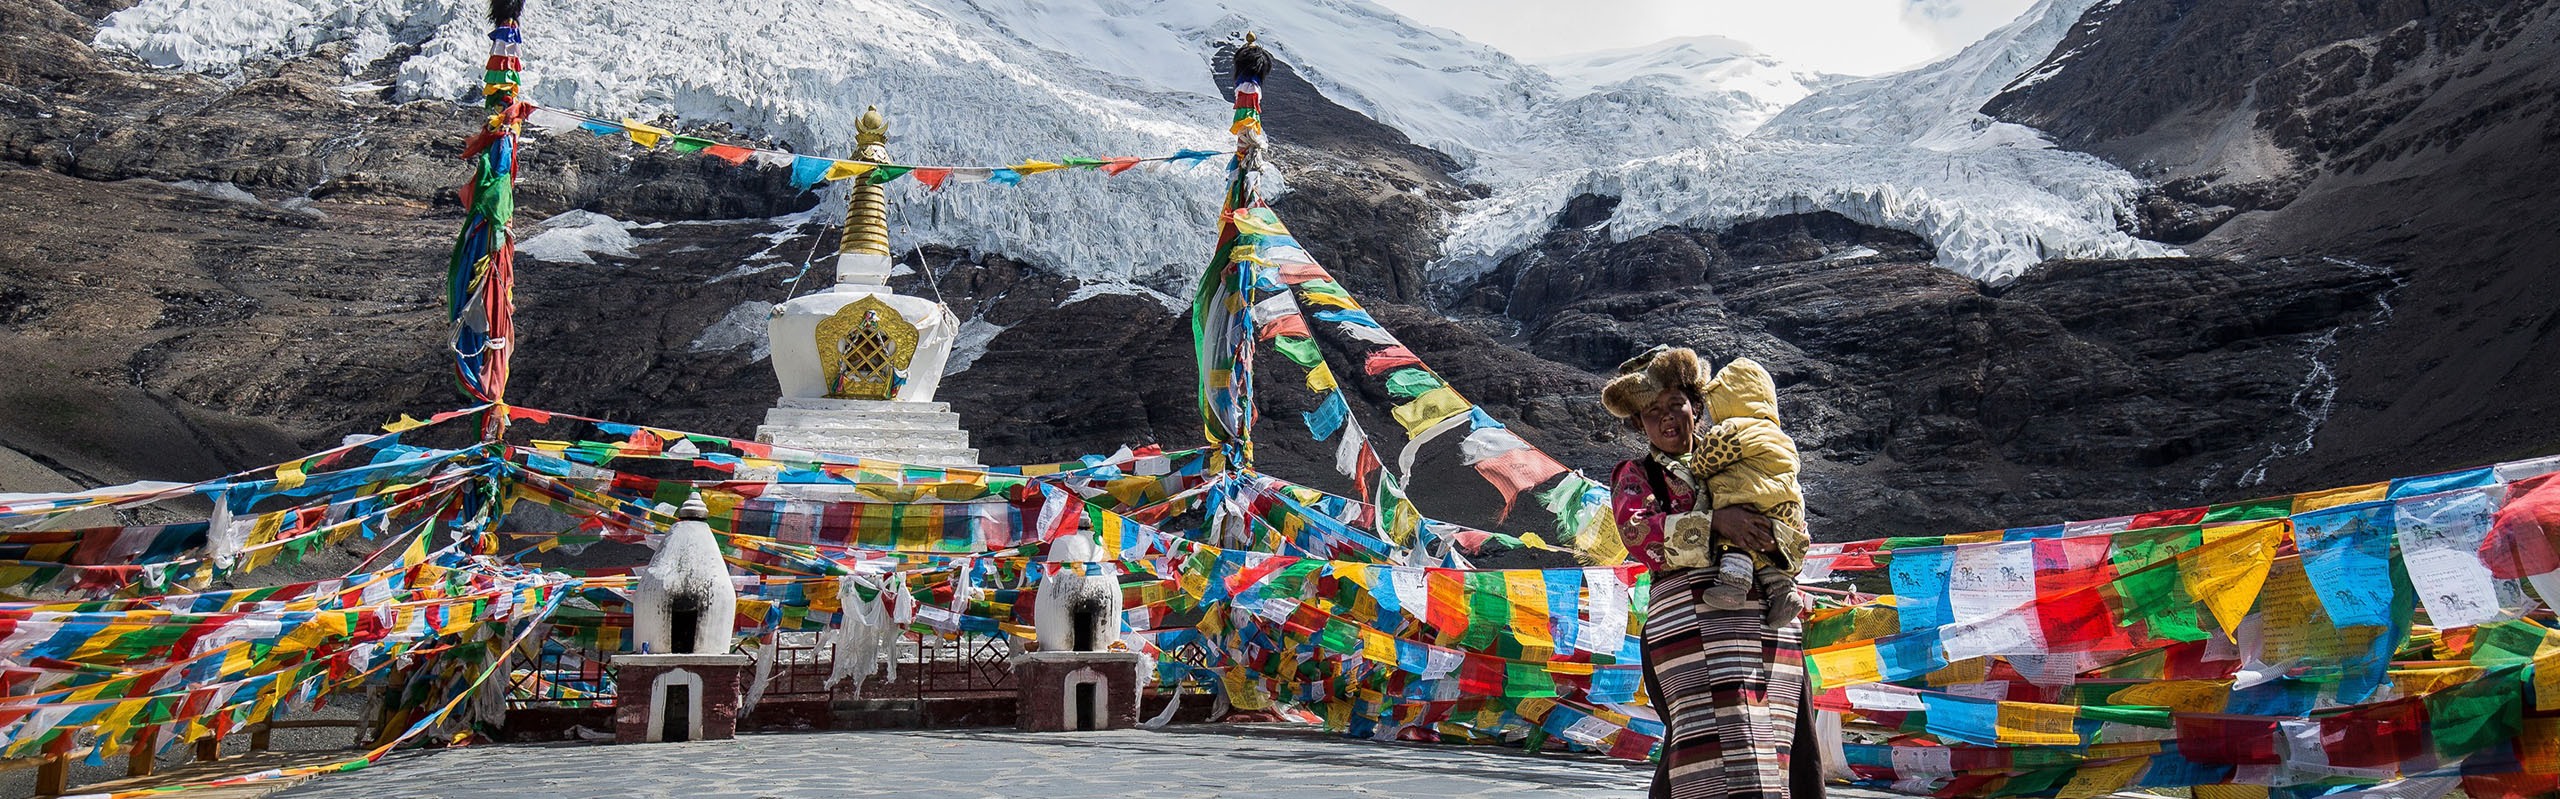 Tibet Small Group Tour | 8-Day Lhasa to Everest (6-12 people)